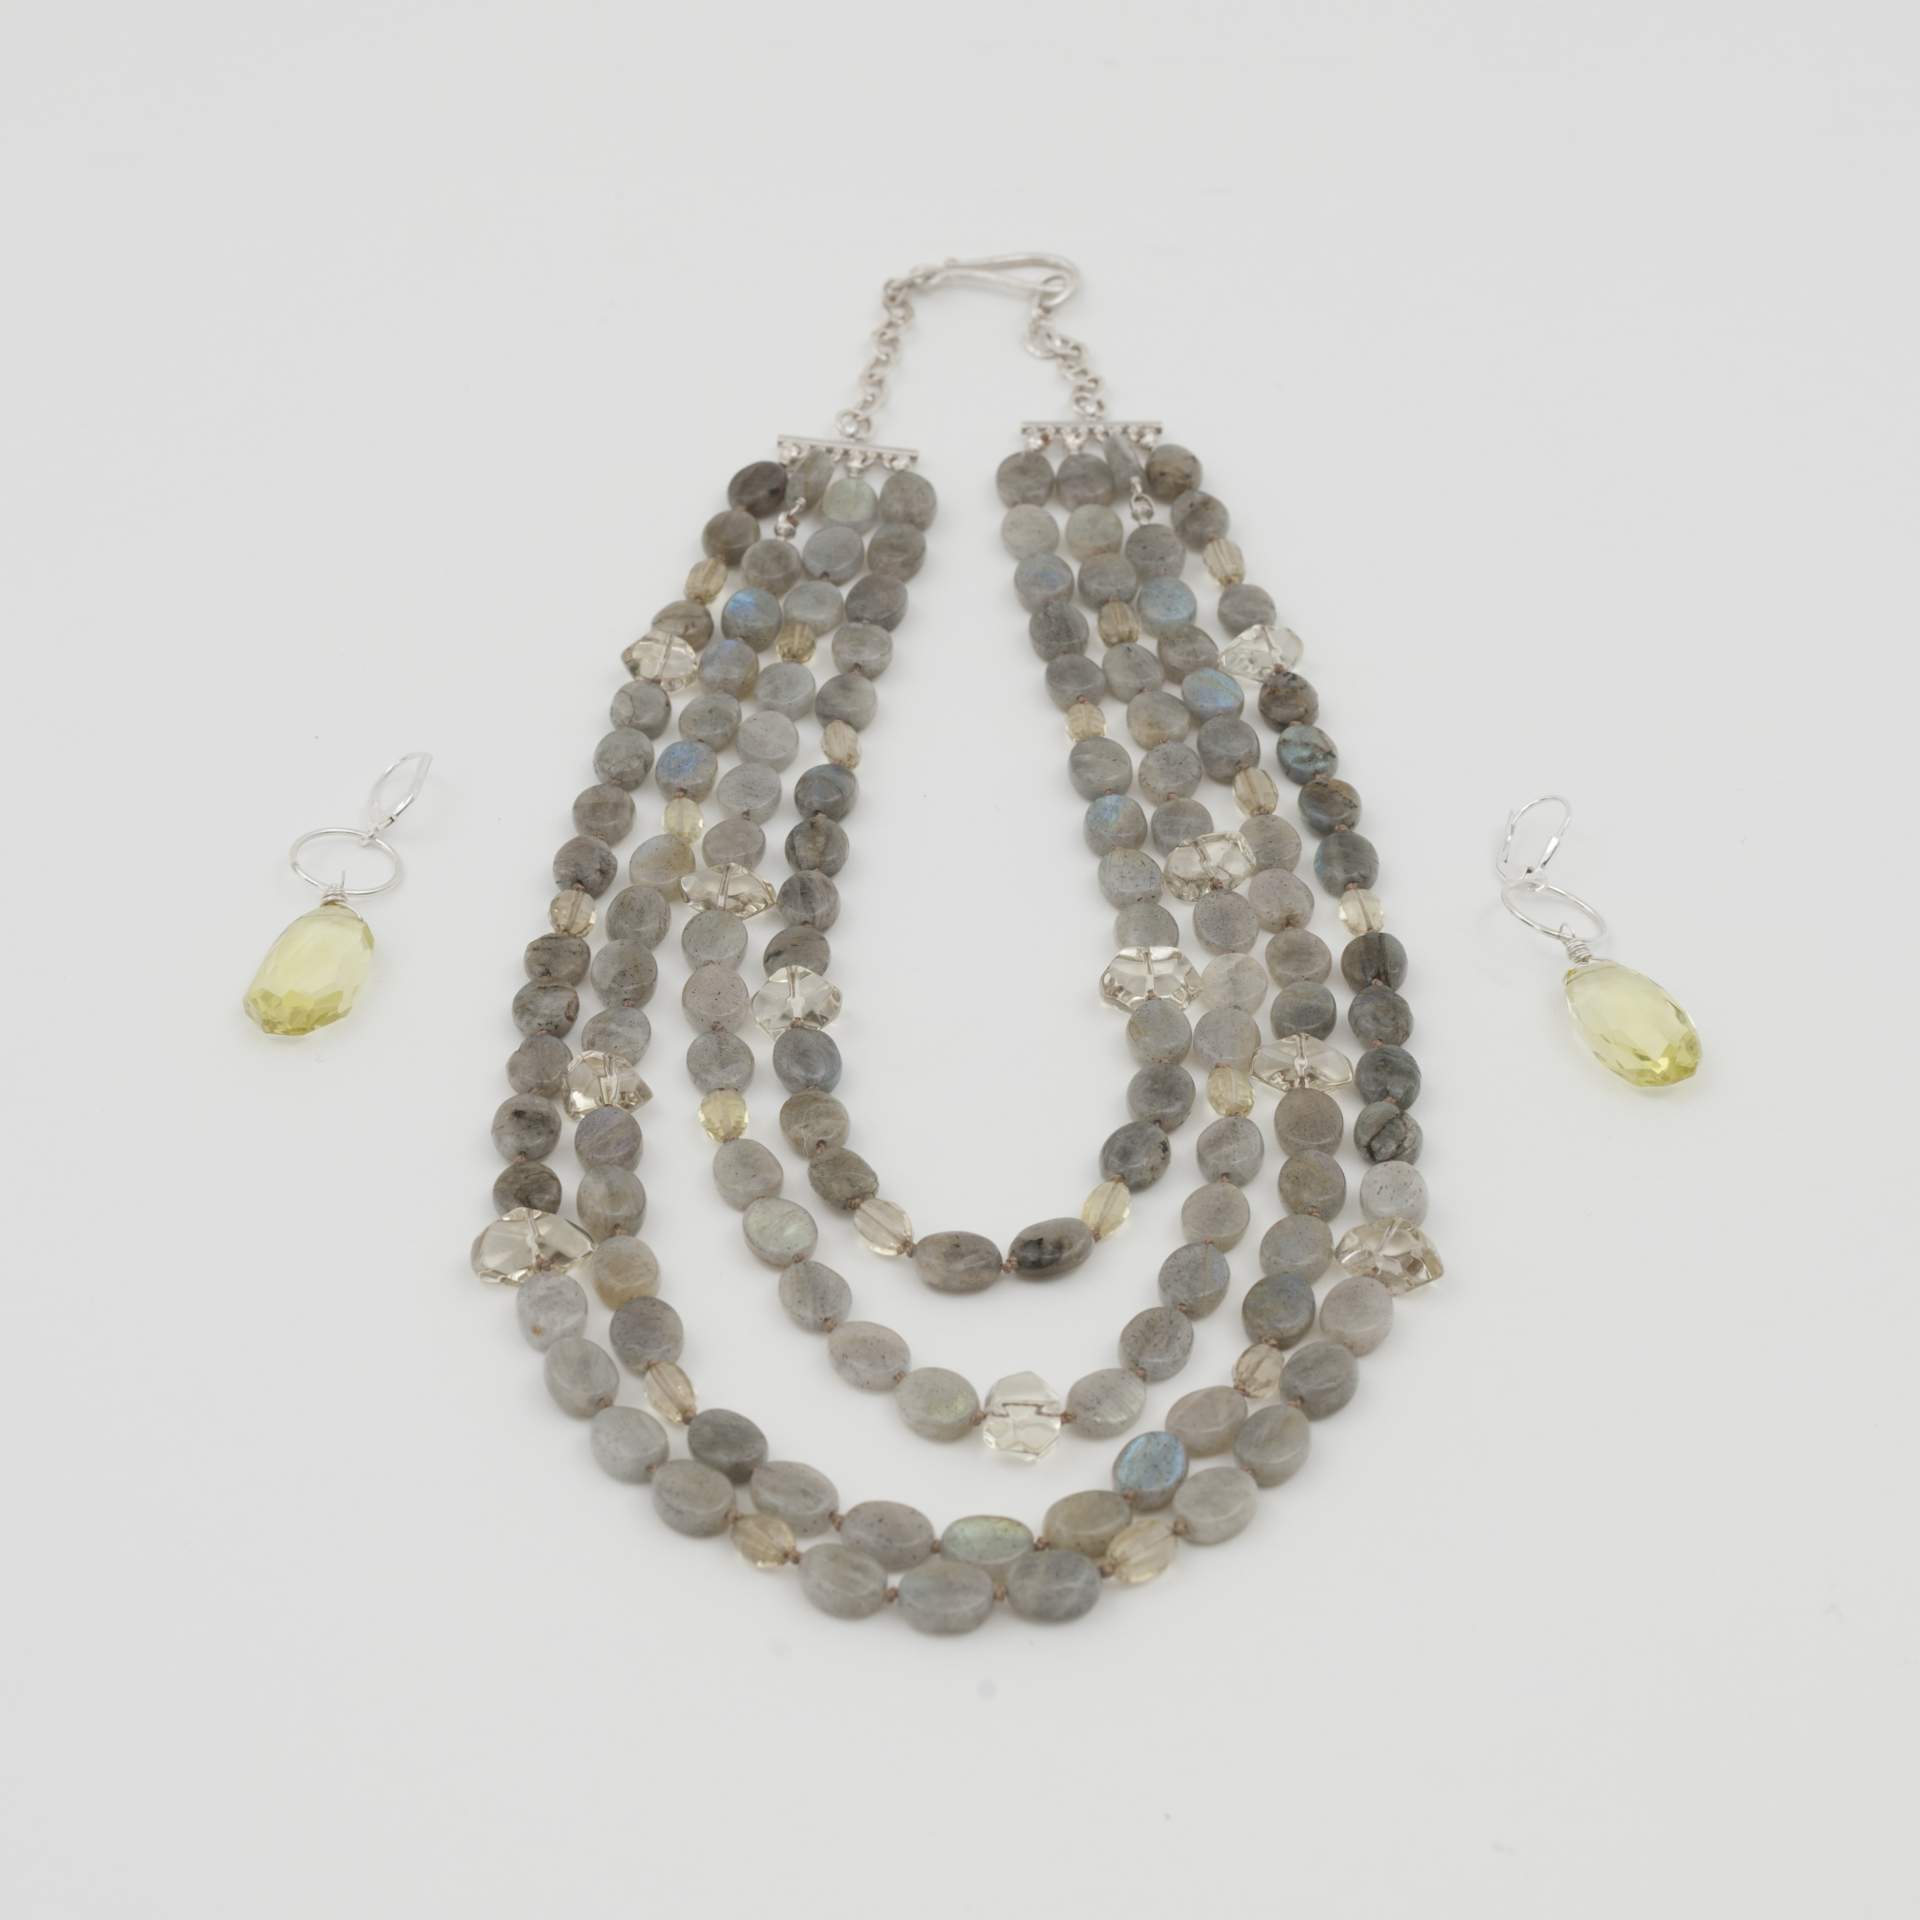 Multistrand Necklace and Earring Set